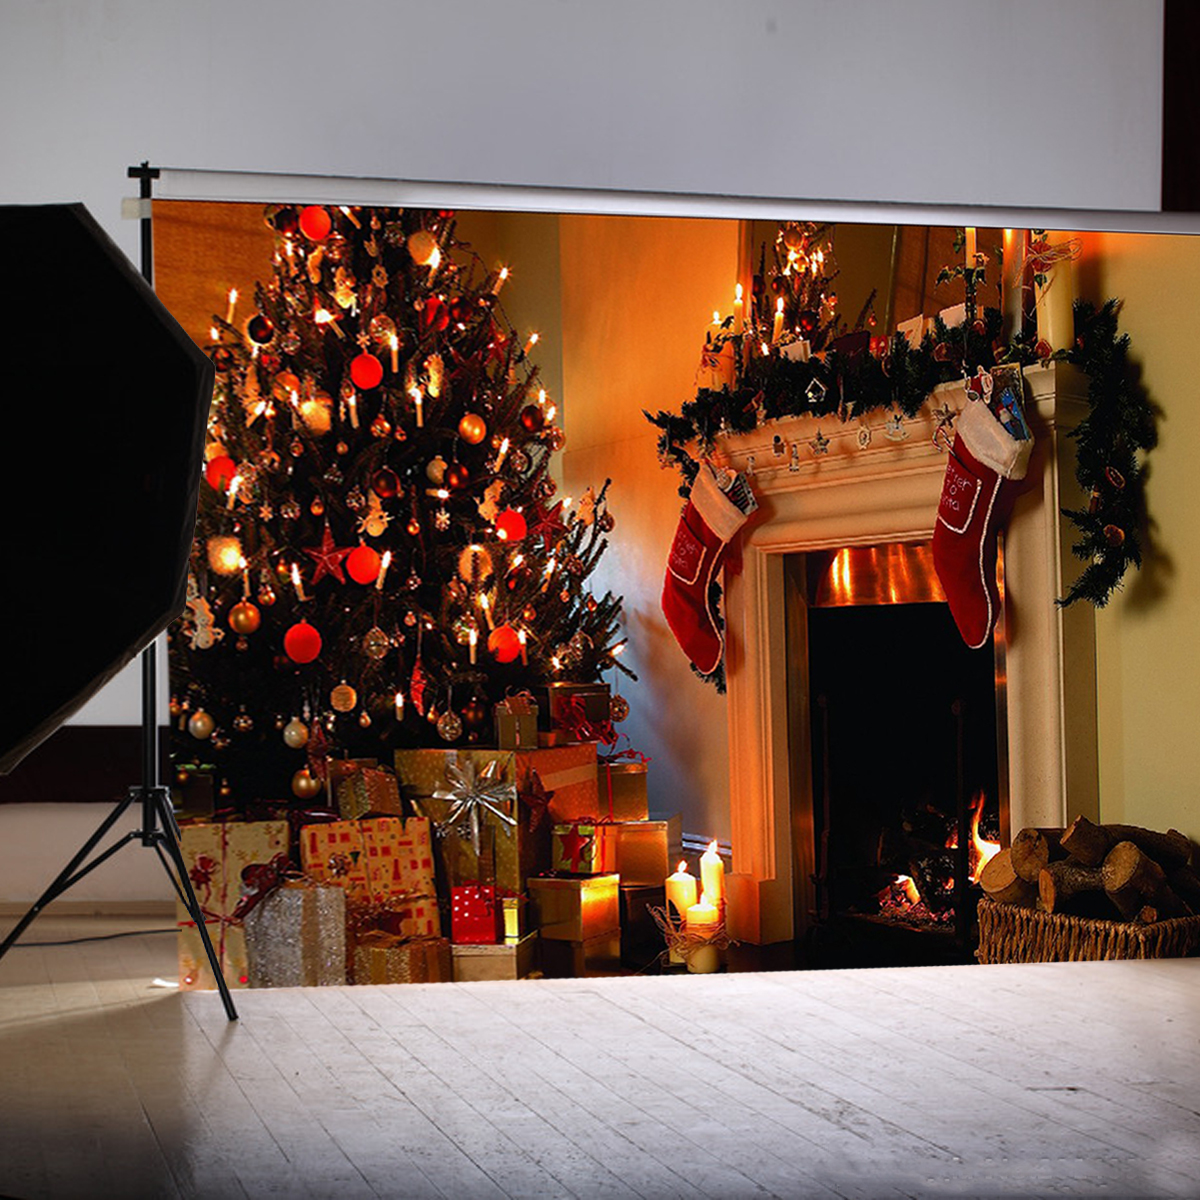 152m-Fireplace-Christmas-Photography-Background-Cloth-Backdrops-Decoration-Toys-1338653-4